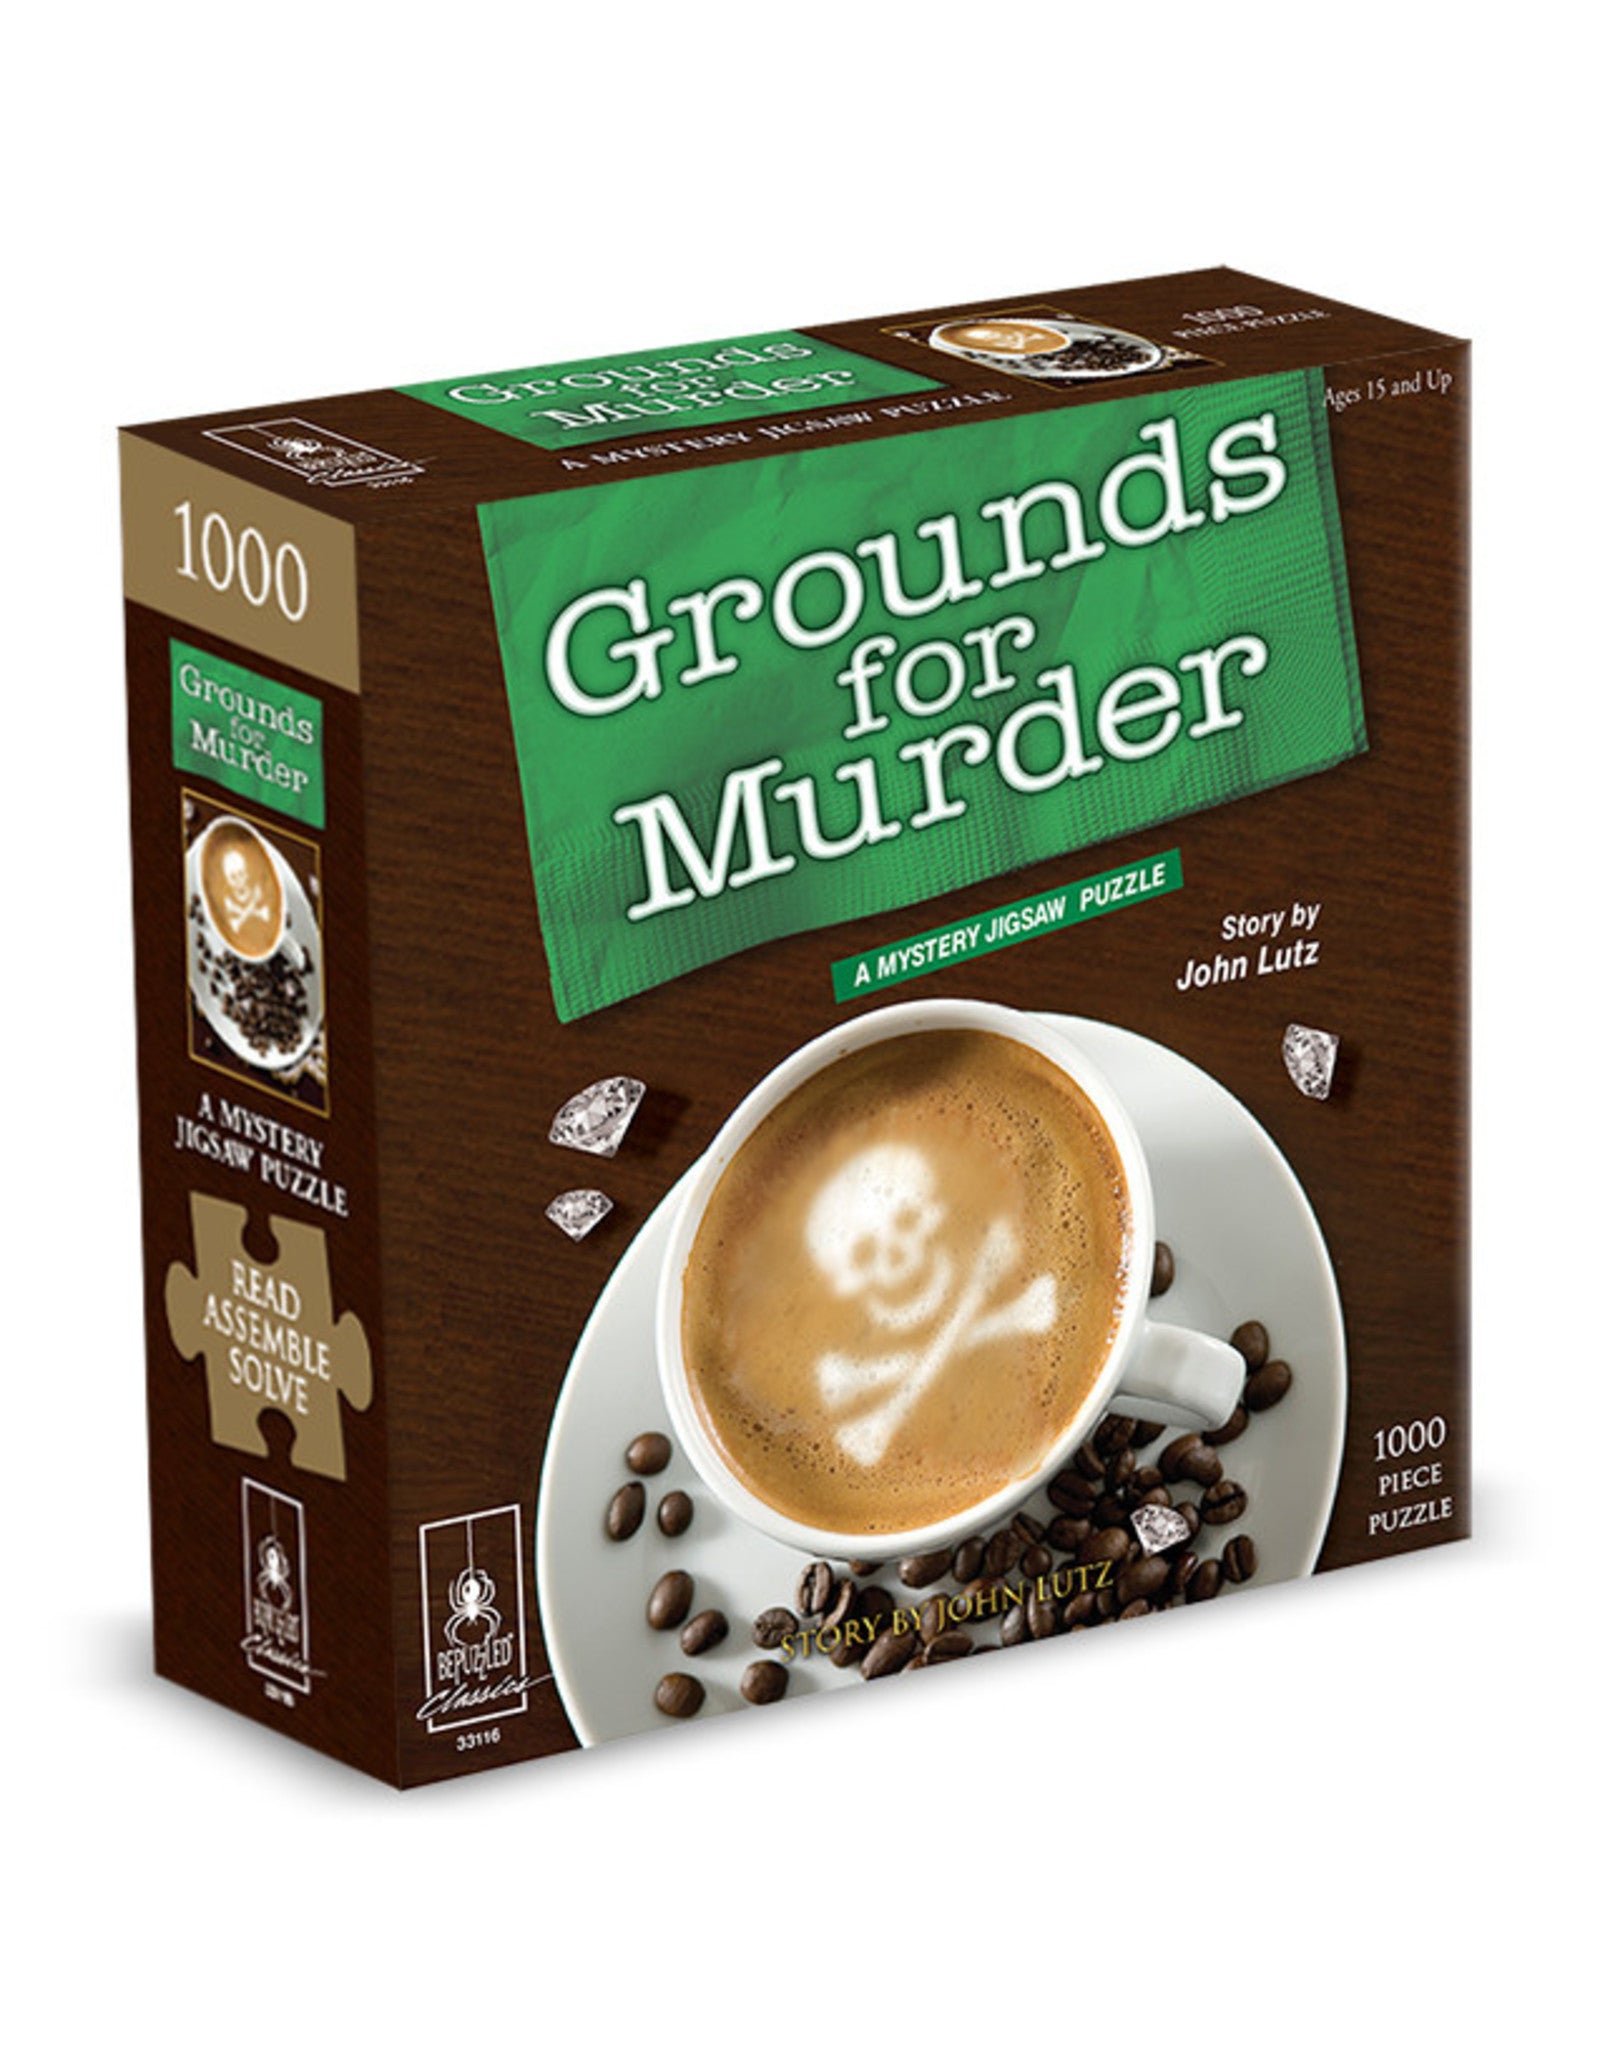 Grounds for Murder: A Mystery Jigsaw Puzzle (1000 pc puzzle)